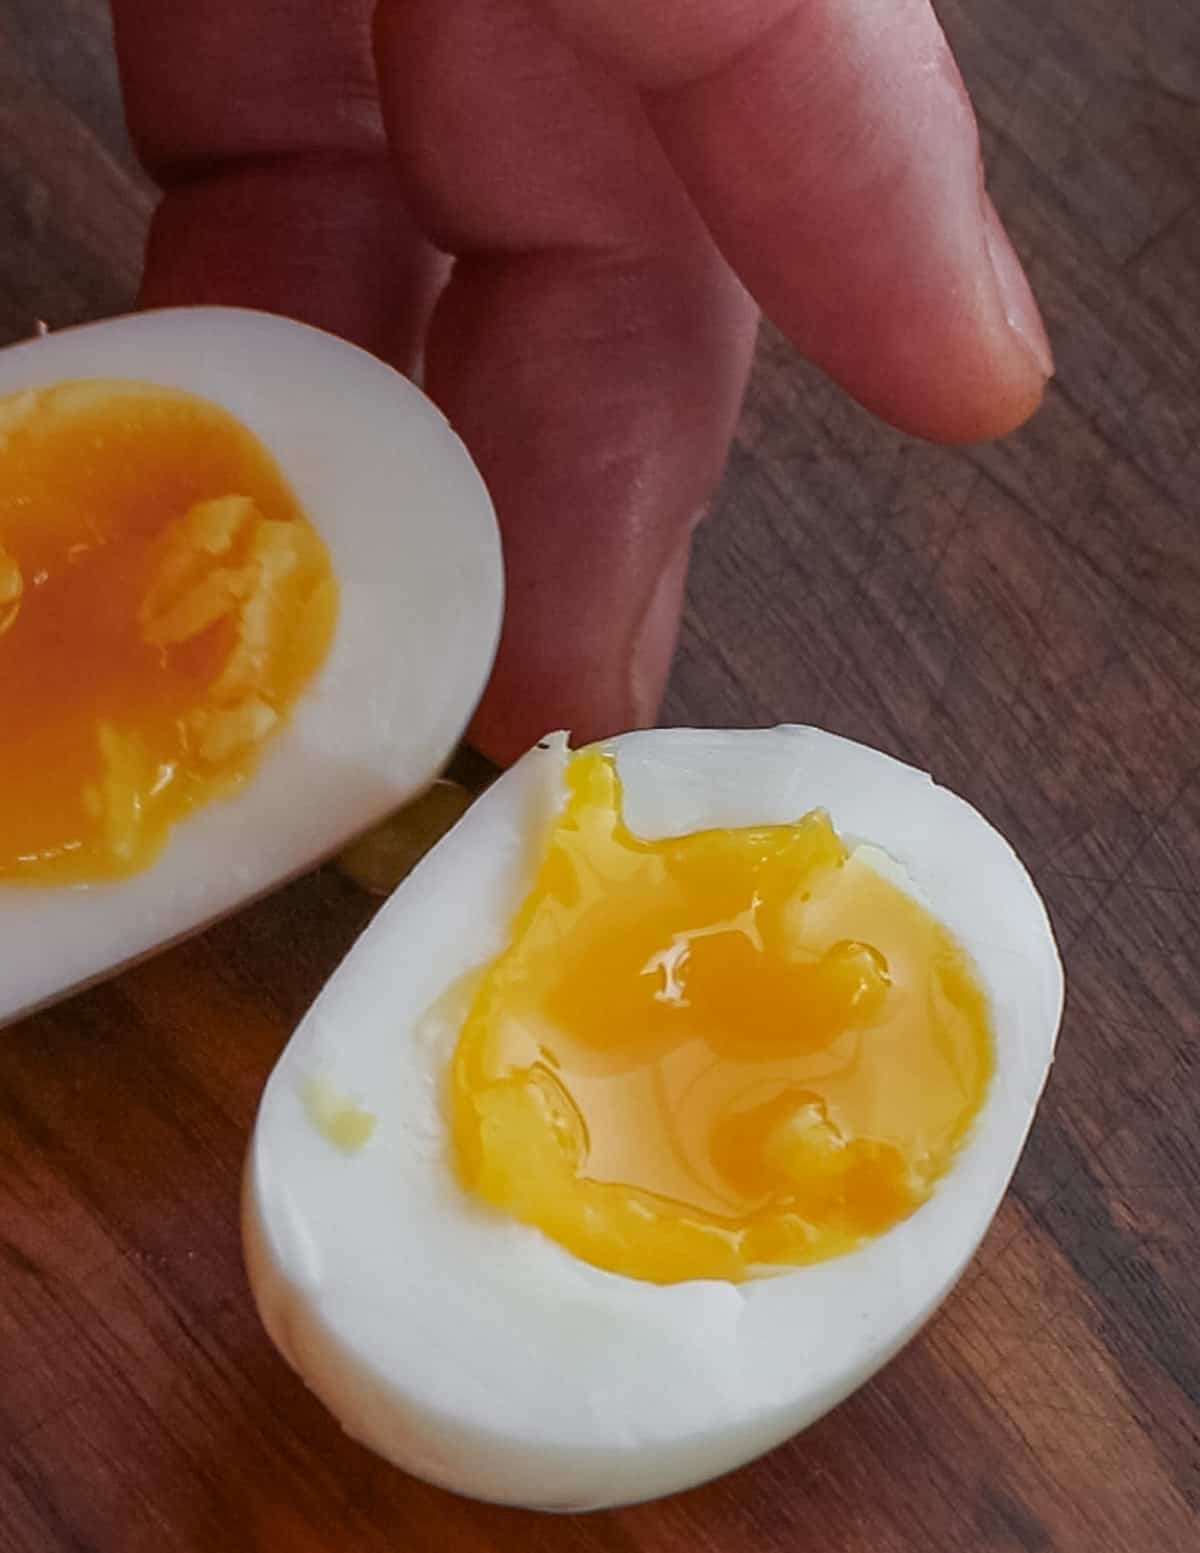 A perfectly cooked six minute egg cut in half with yolk spilling out on a cutting board.  